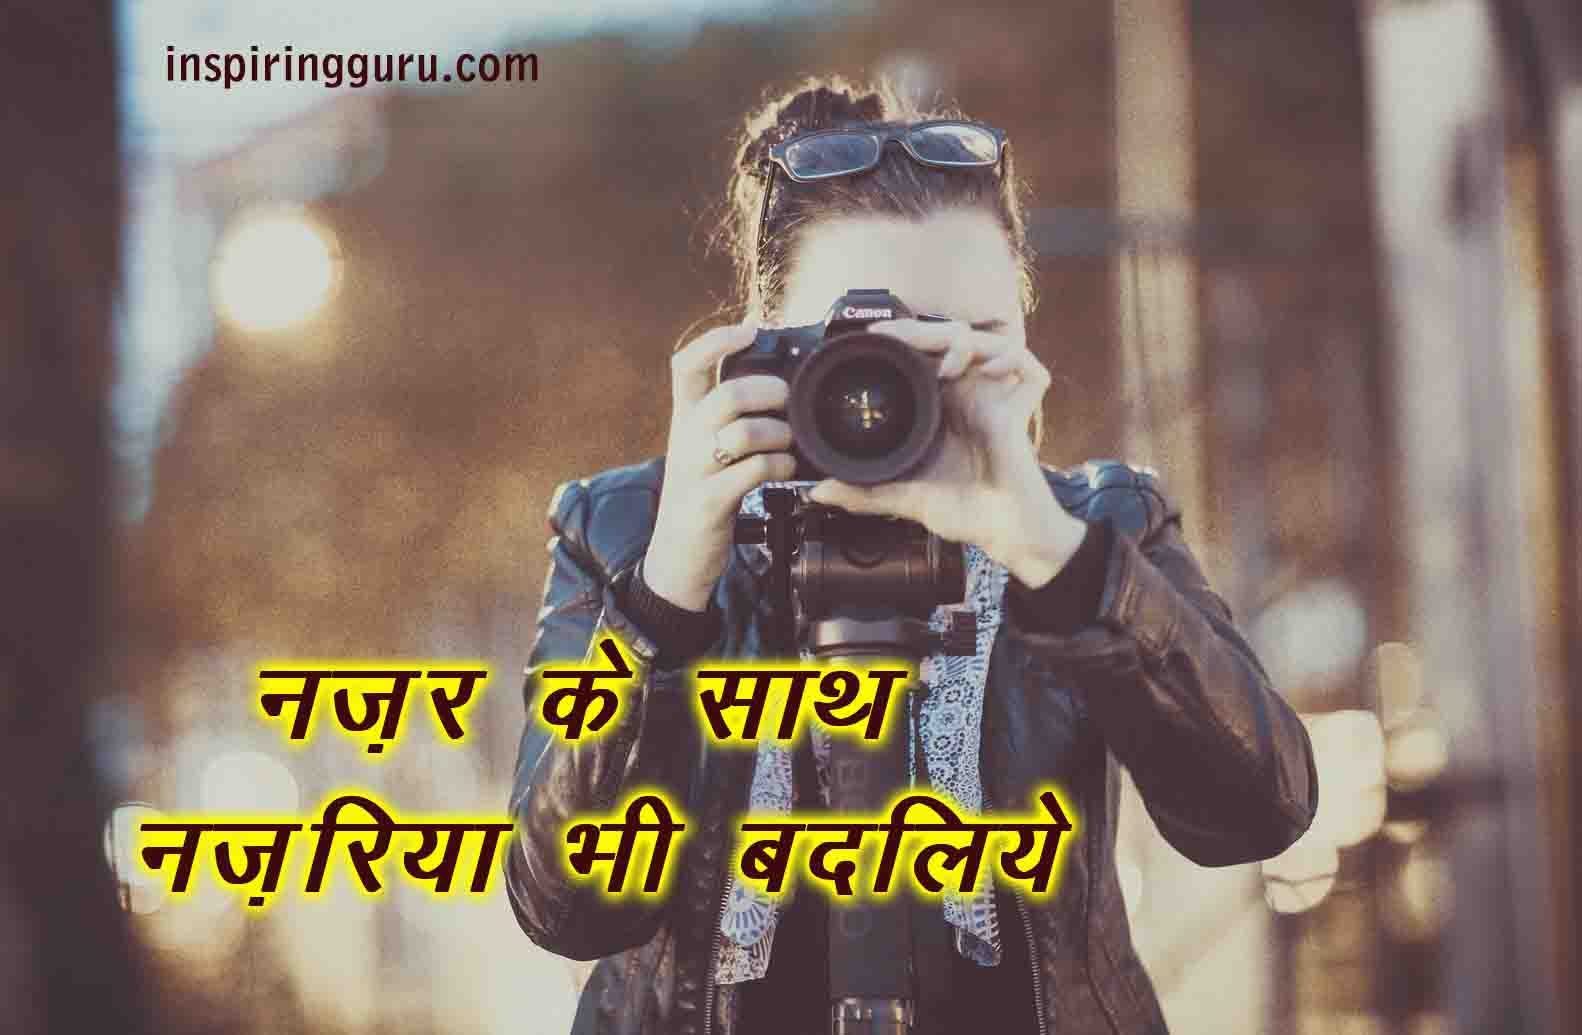 photography & video